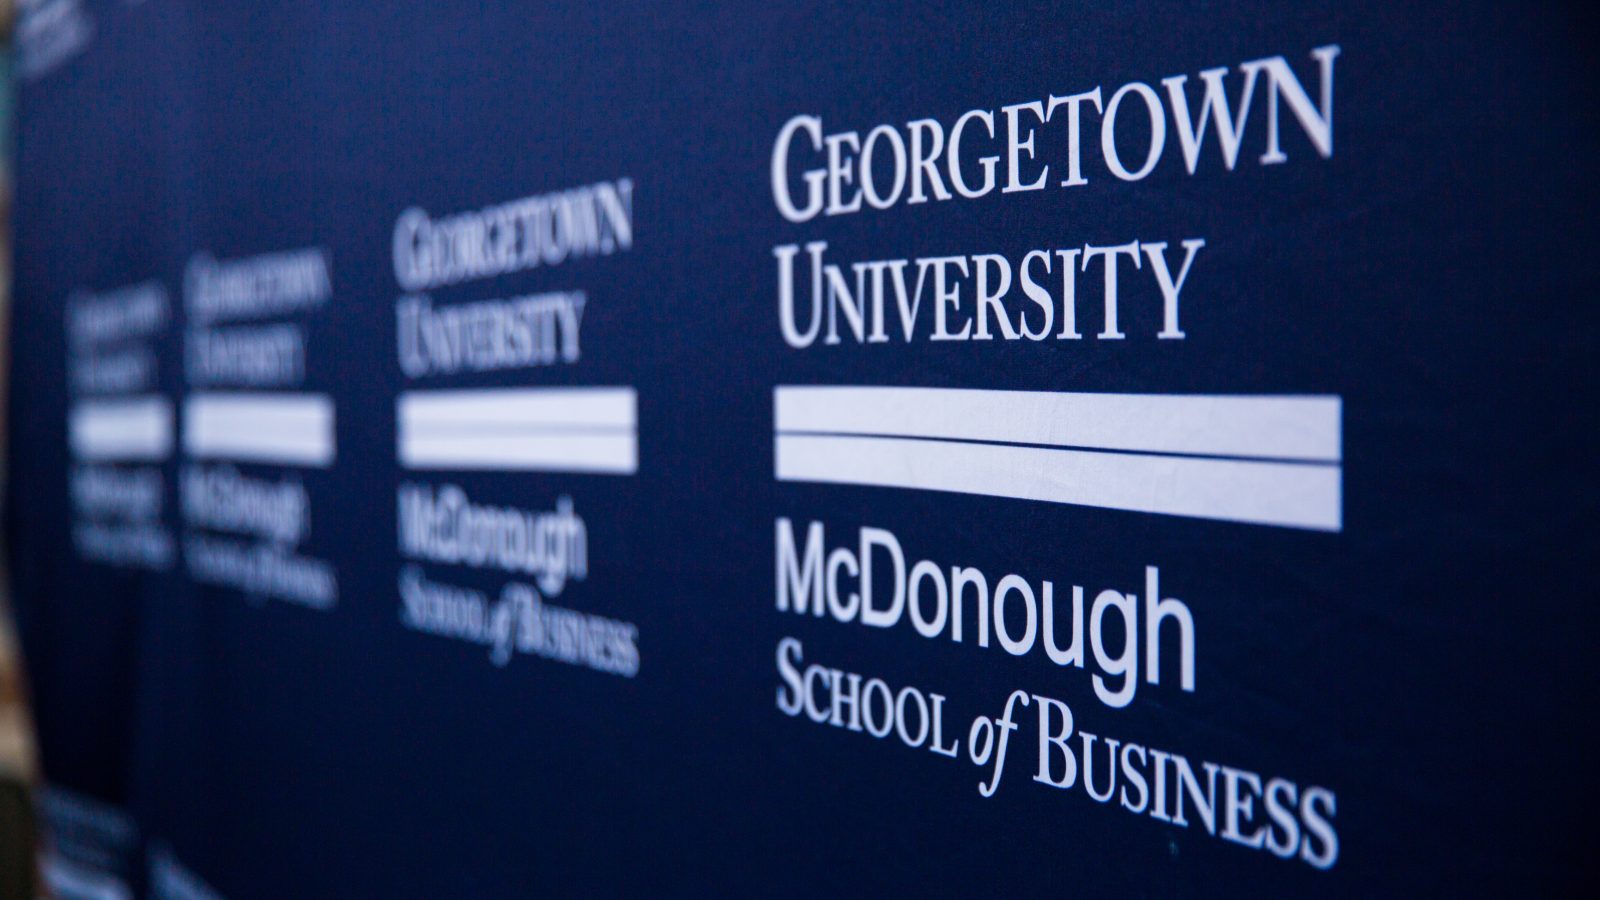 Image of the McDonough Business School